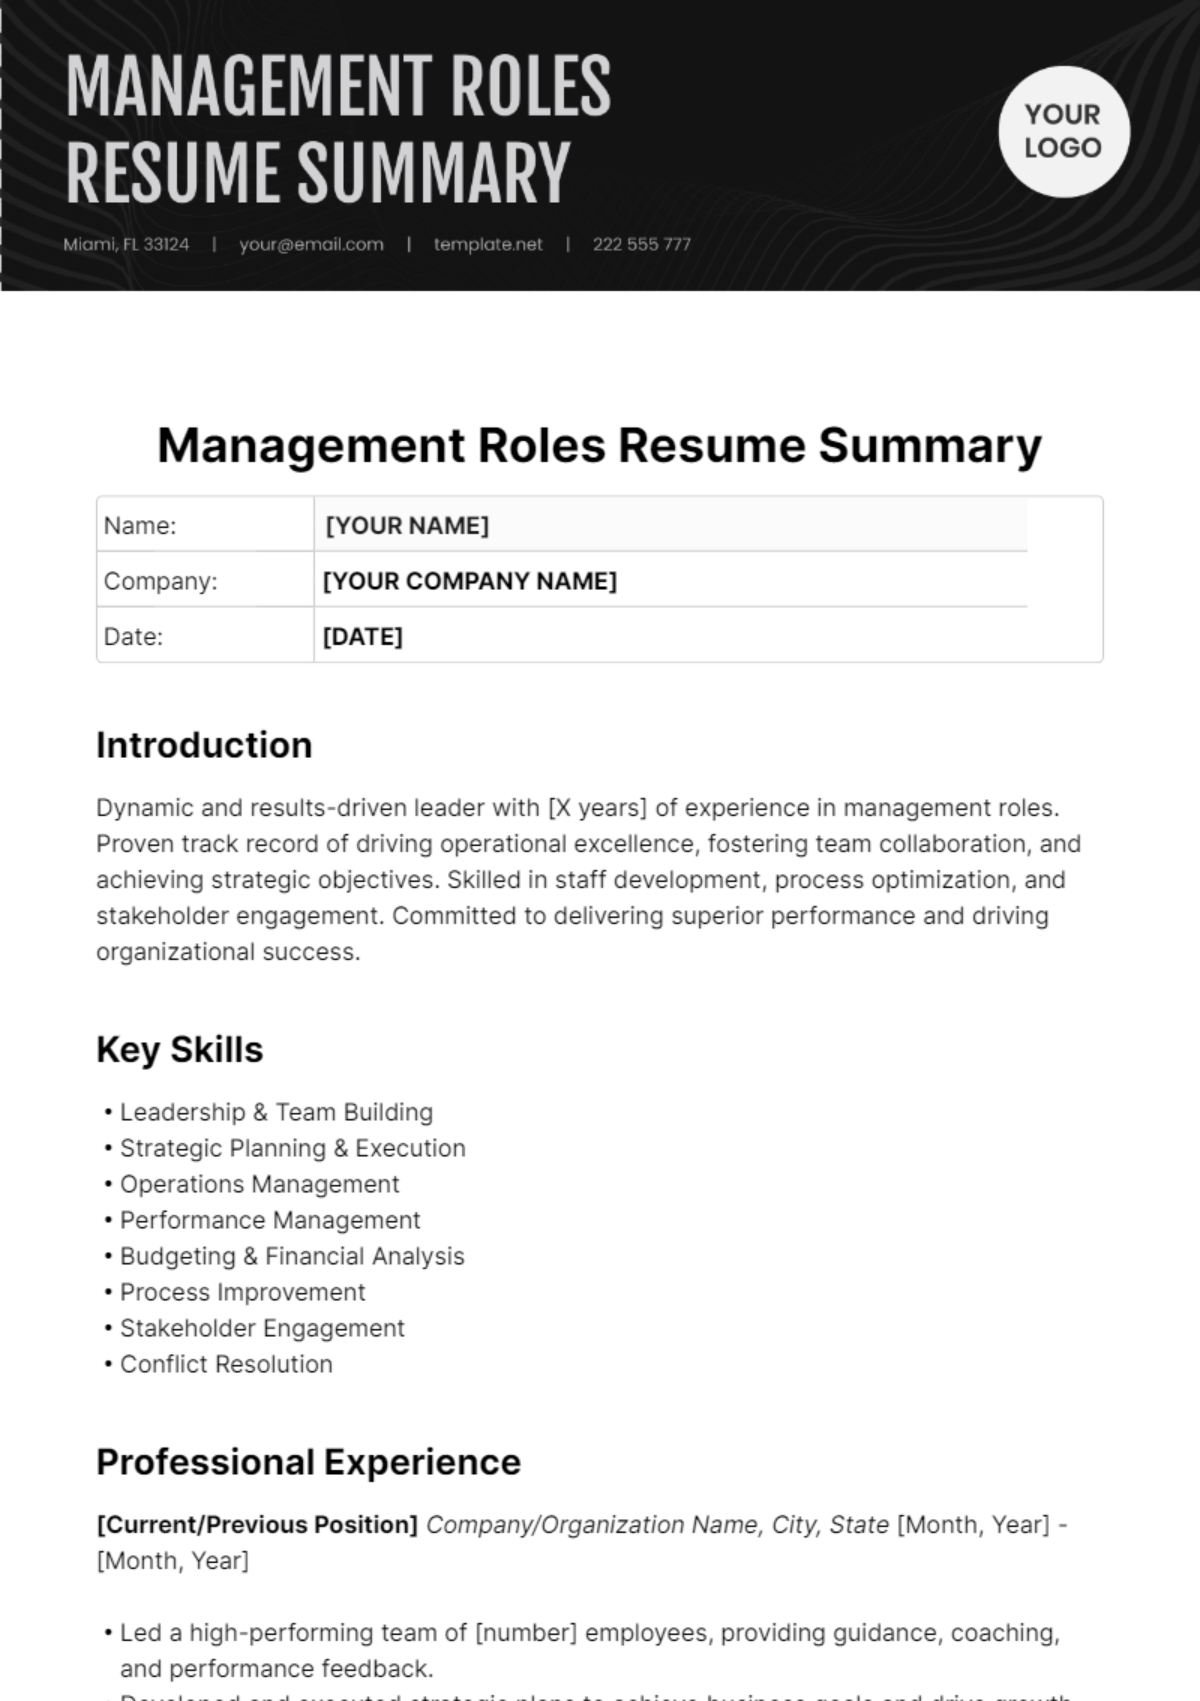 Management Roles Resume Summary Template